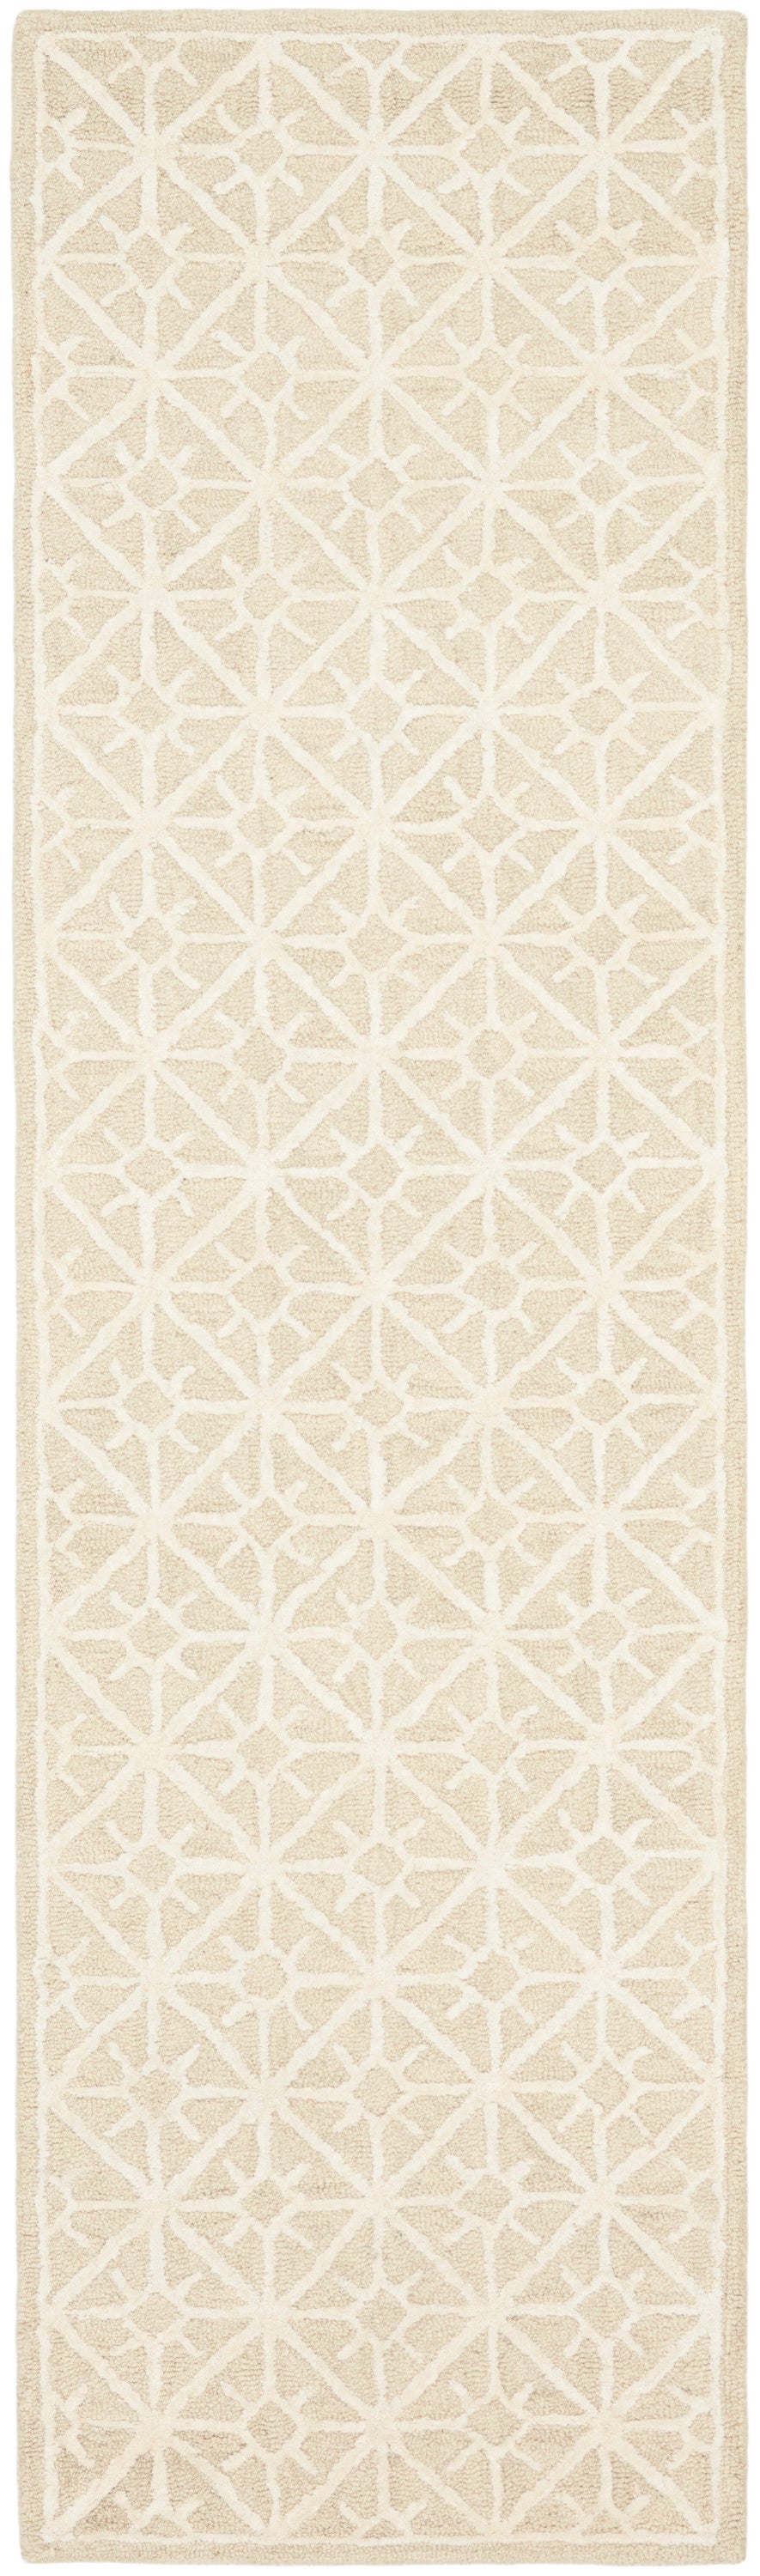 Nicole Curtis Series 2 SR201 Ivory  Contemporary Tufted Rug